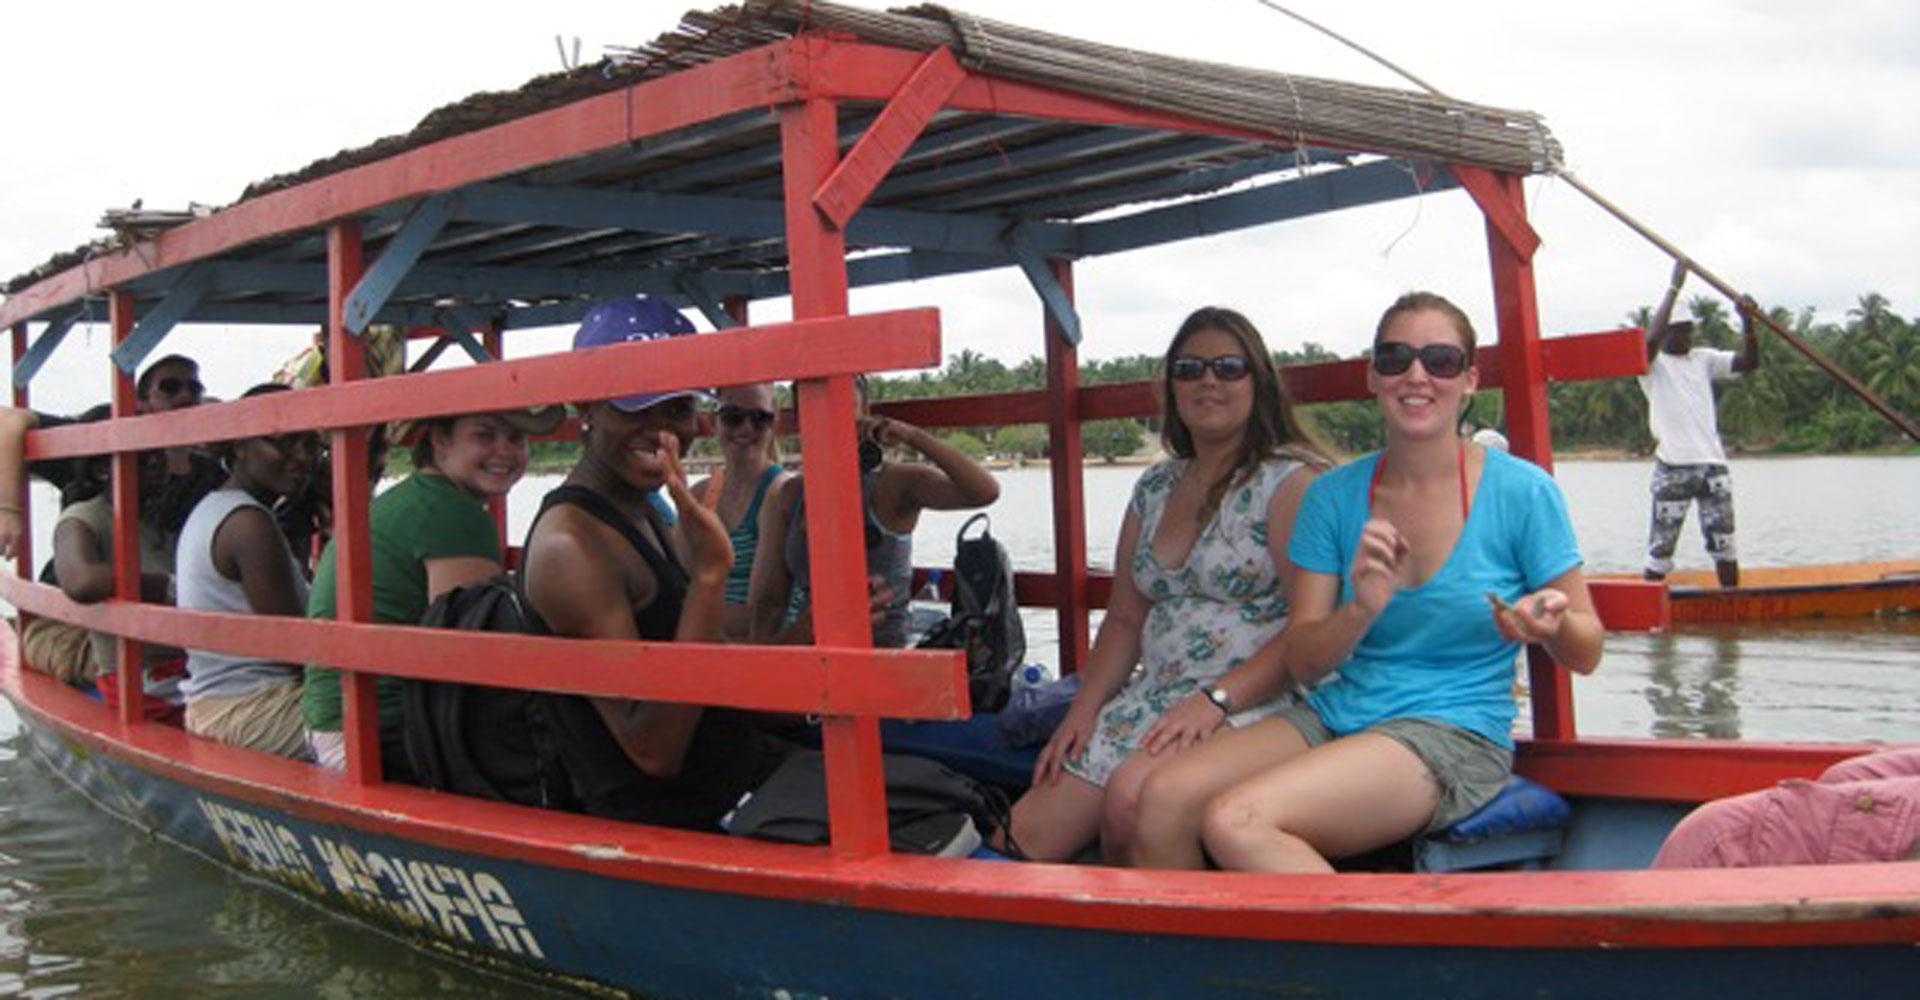 Students sit in a boat on the water and wave at the camera.